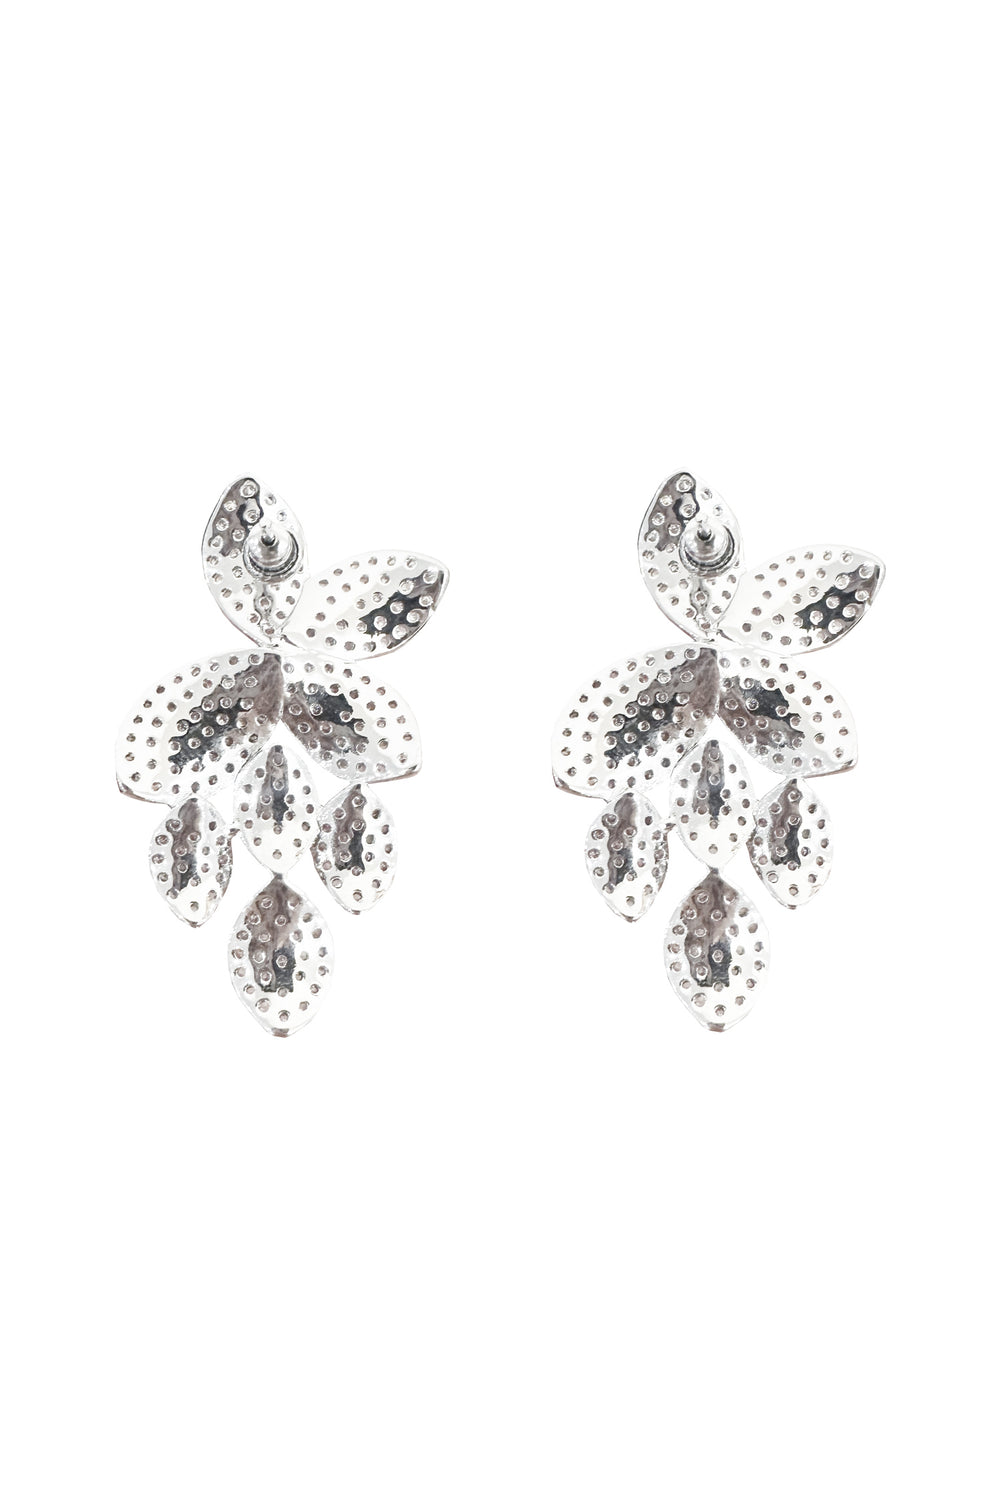 Reverse view of silver flower earrings encrusted with diamantes, revealing a polished finish and meticulous craftsmanship. Elevate your look with this glamorous and versatile accessory.